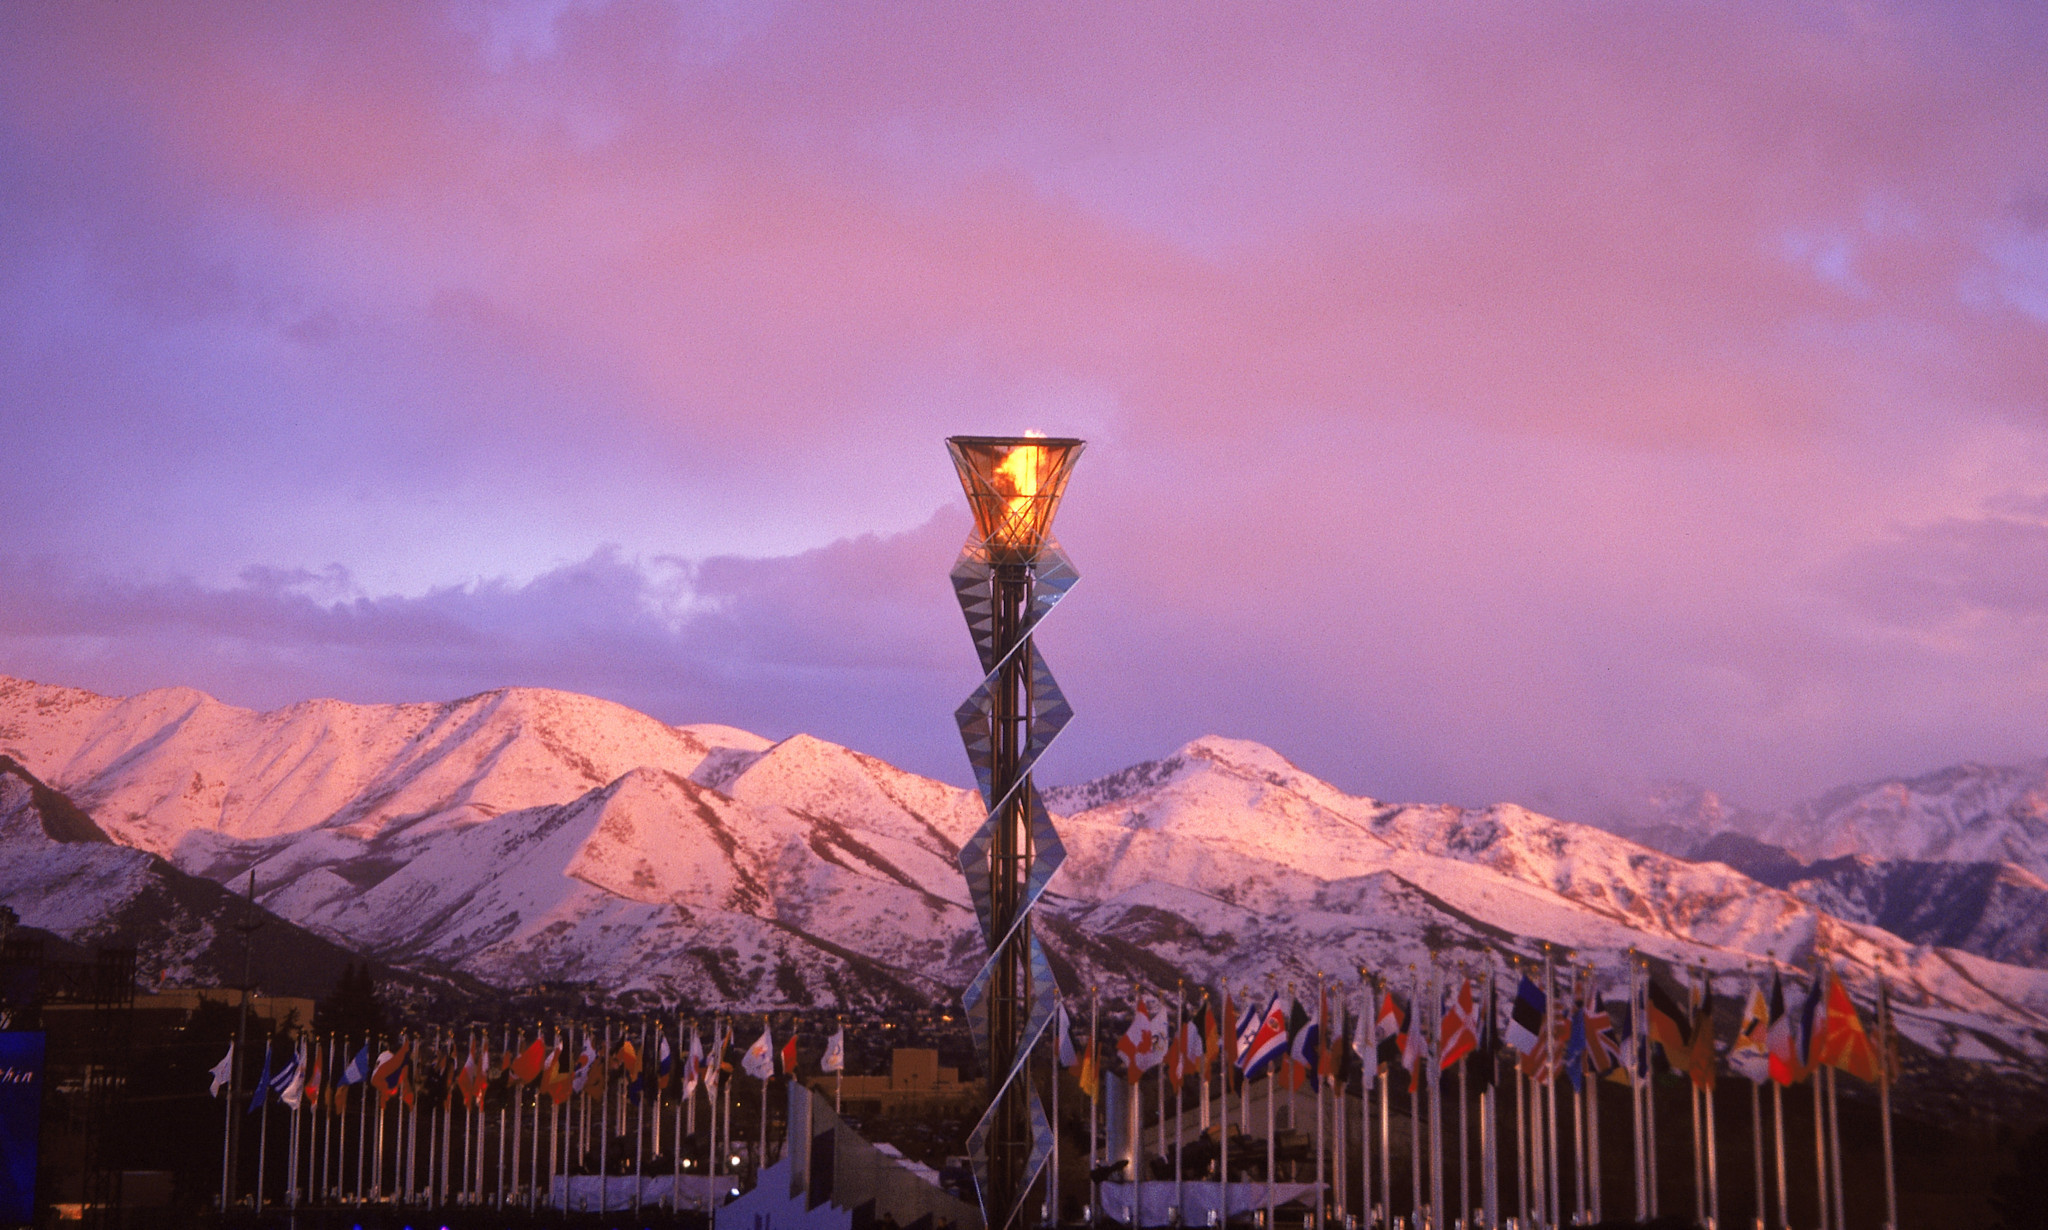 Salt Lake City bid chief has "fingers crossed" for 2030 Winter Olympics after IOC visit